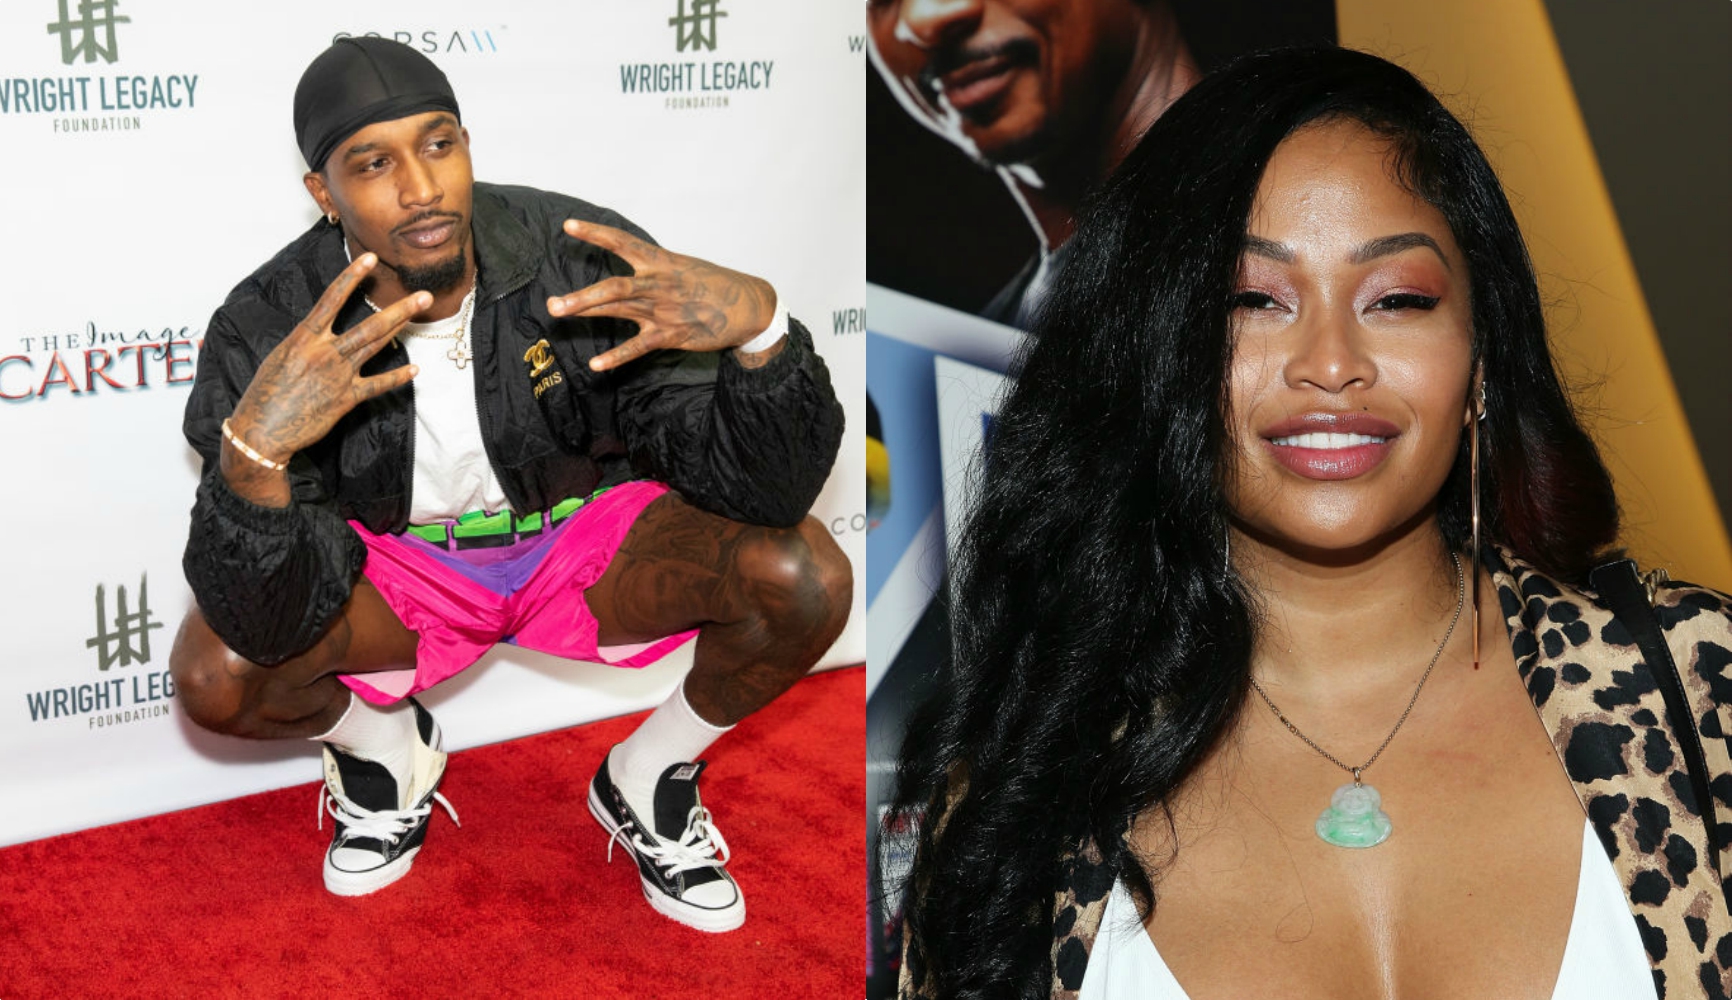 Shelved NBA Baller Brandon Jennings Shades Tae Heckard For Being 41-Years-Old and Contemplating Basketball Wives